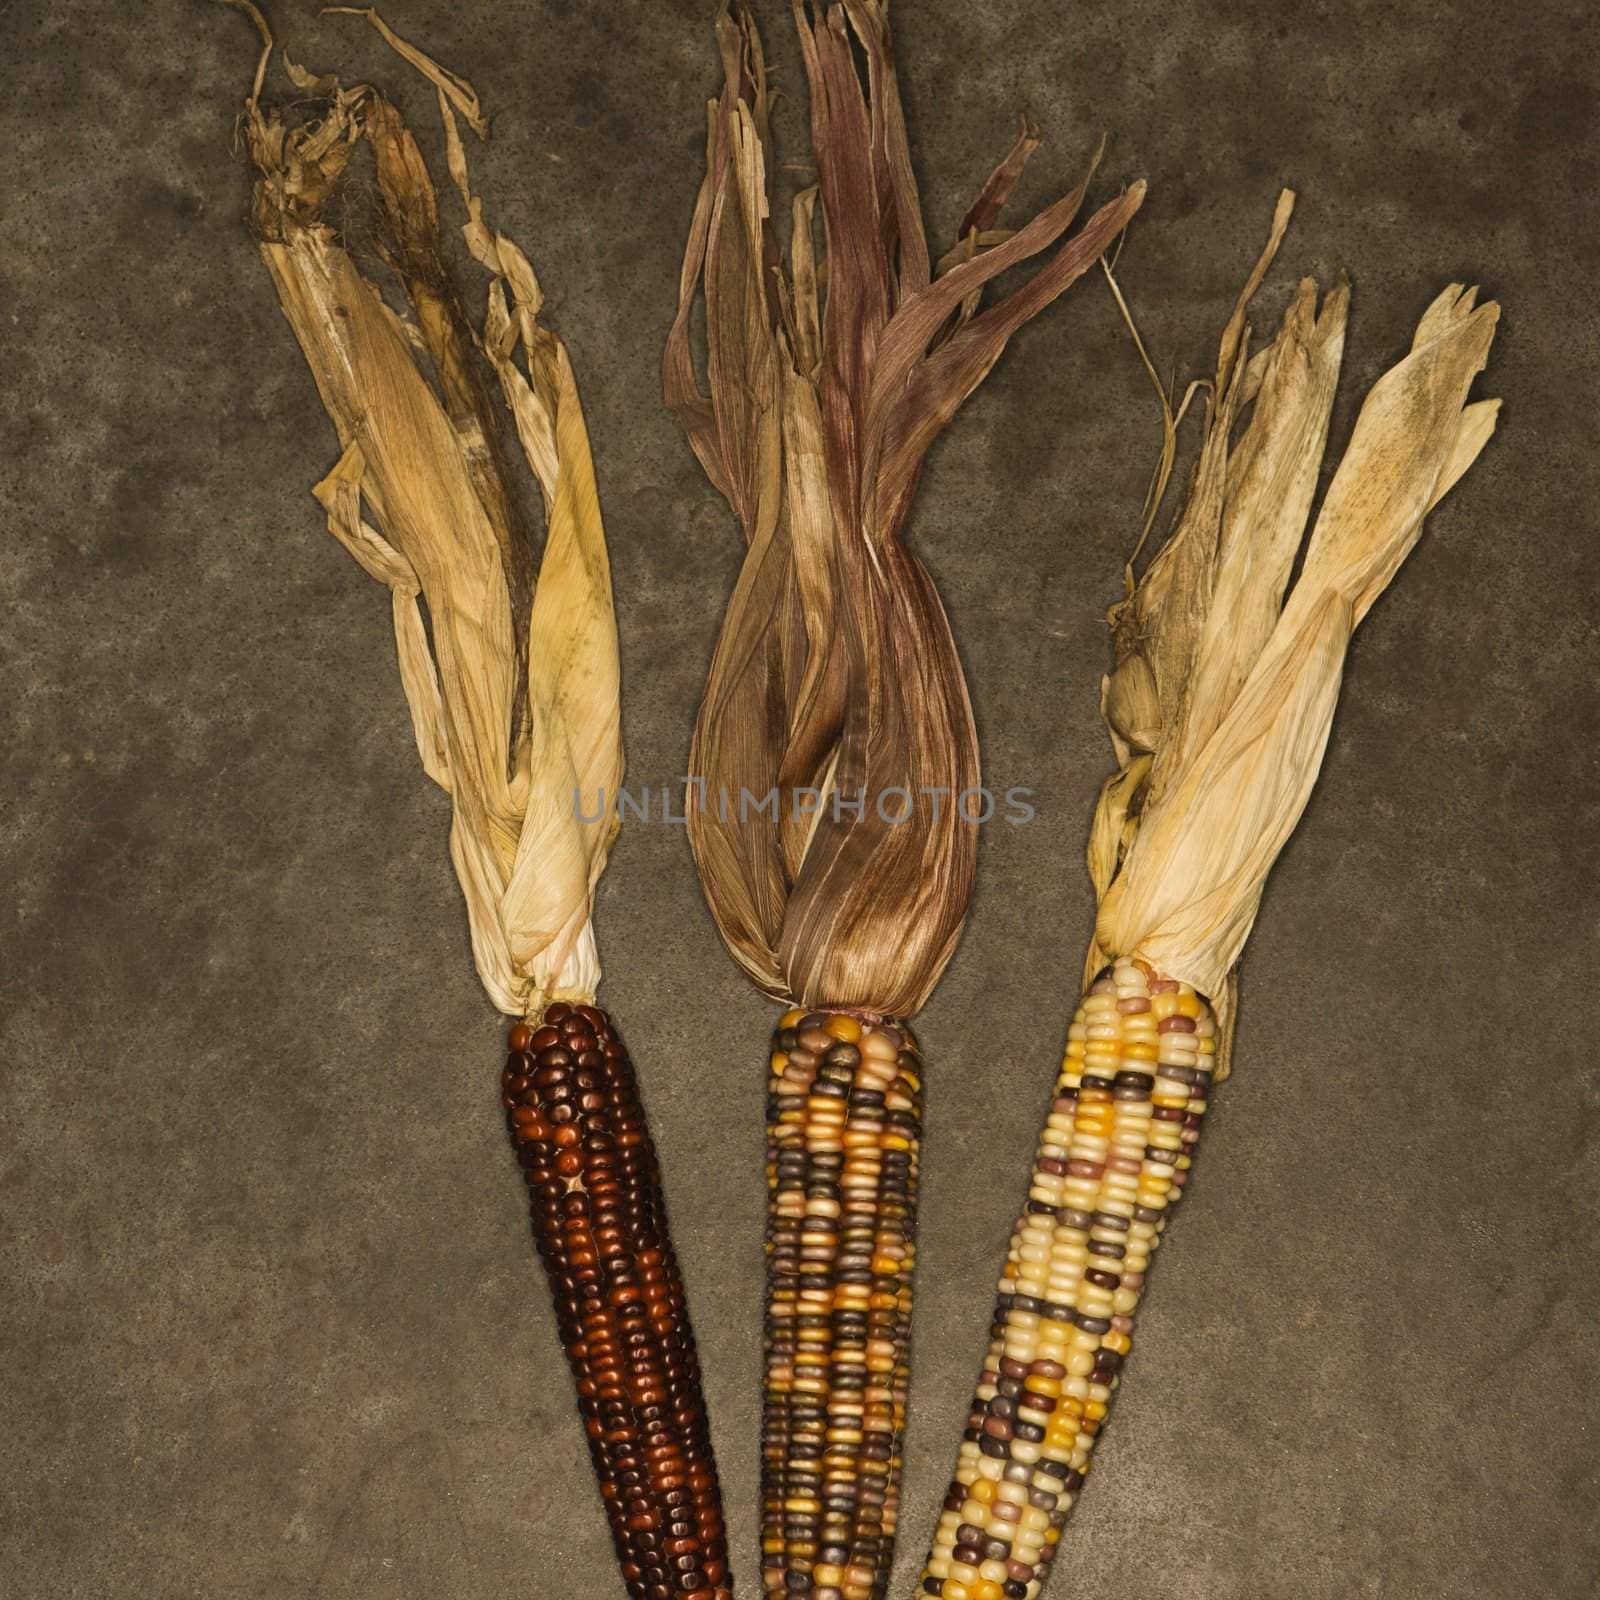 Three ears of multicolored Indian corn against black background.